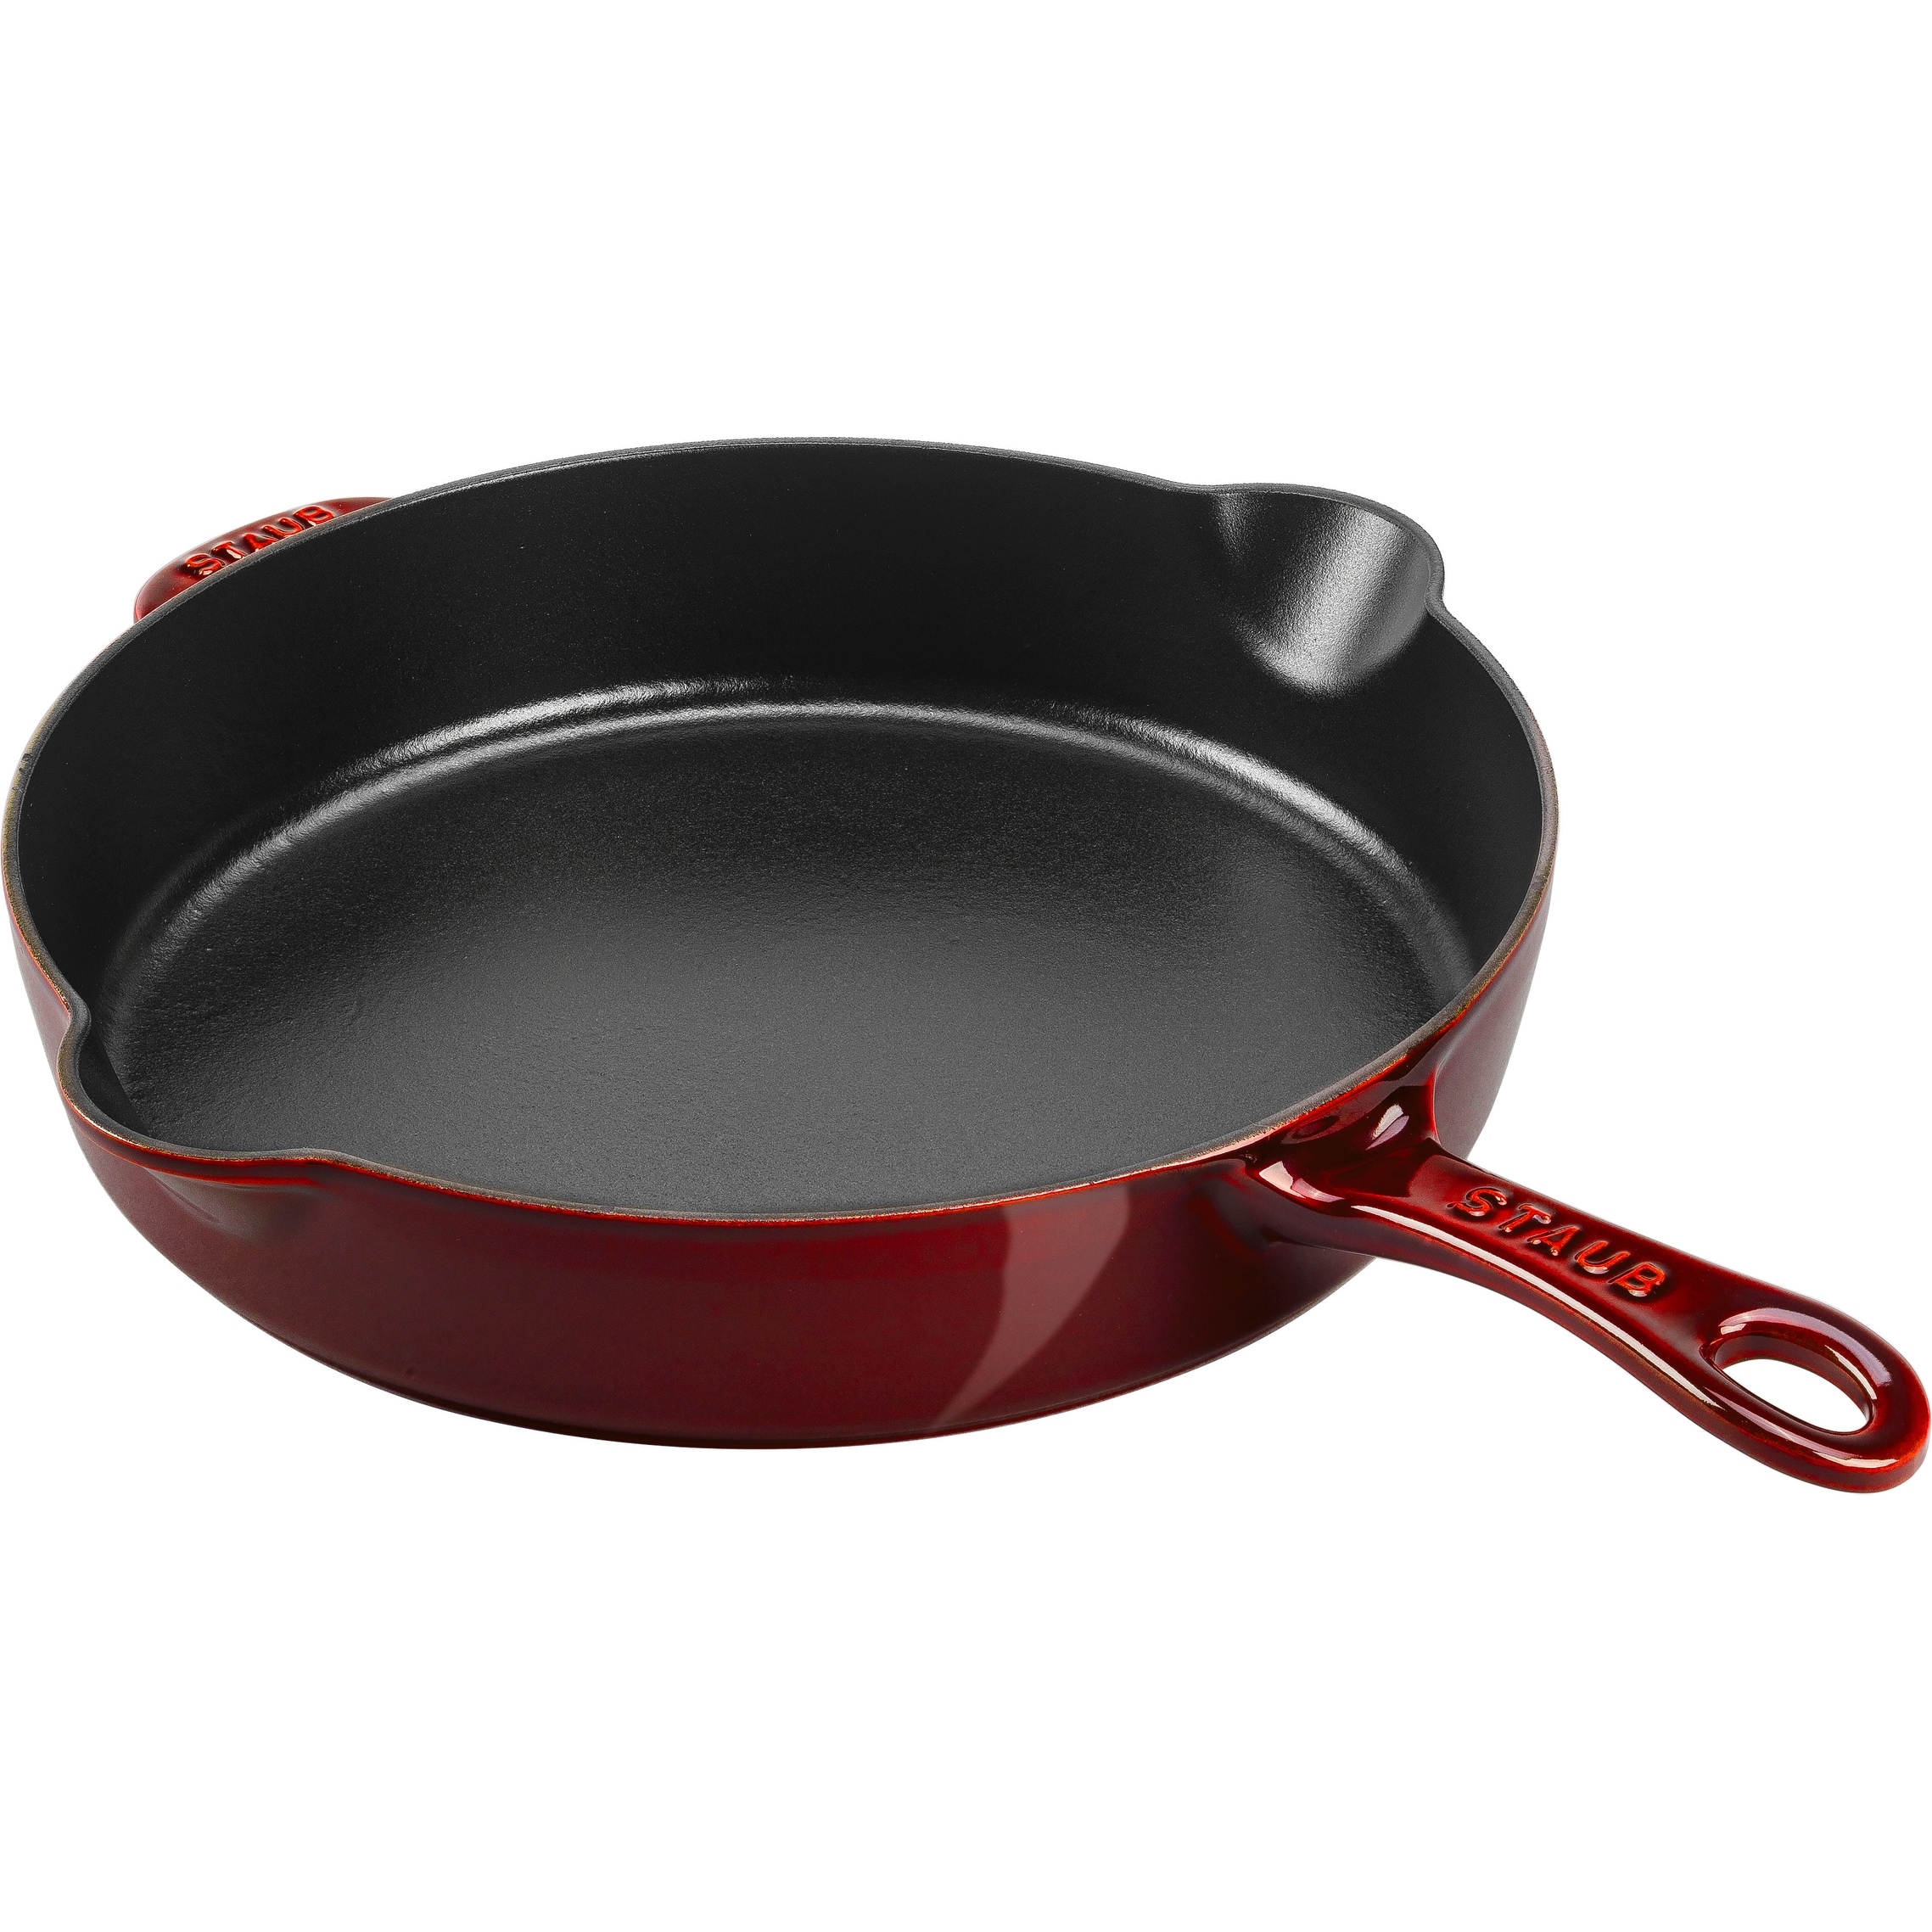 https://ak1.ostkcdn.com/images/products/is/images/direct/36fda8d219a81b0f53ced83d4429b9616edfbe7e/Staub-Cast-Iron-11-inch-Traditional-Skillet.jpg